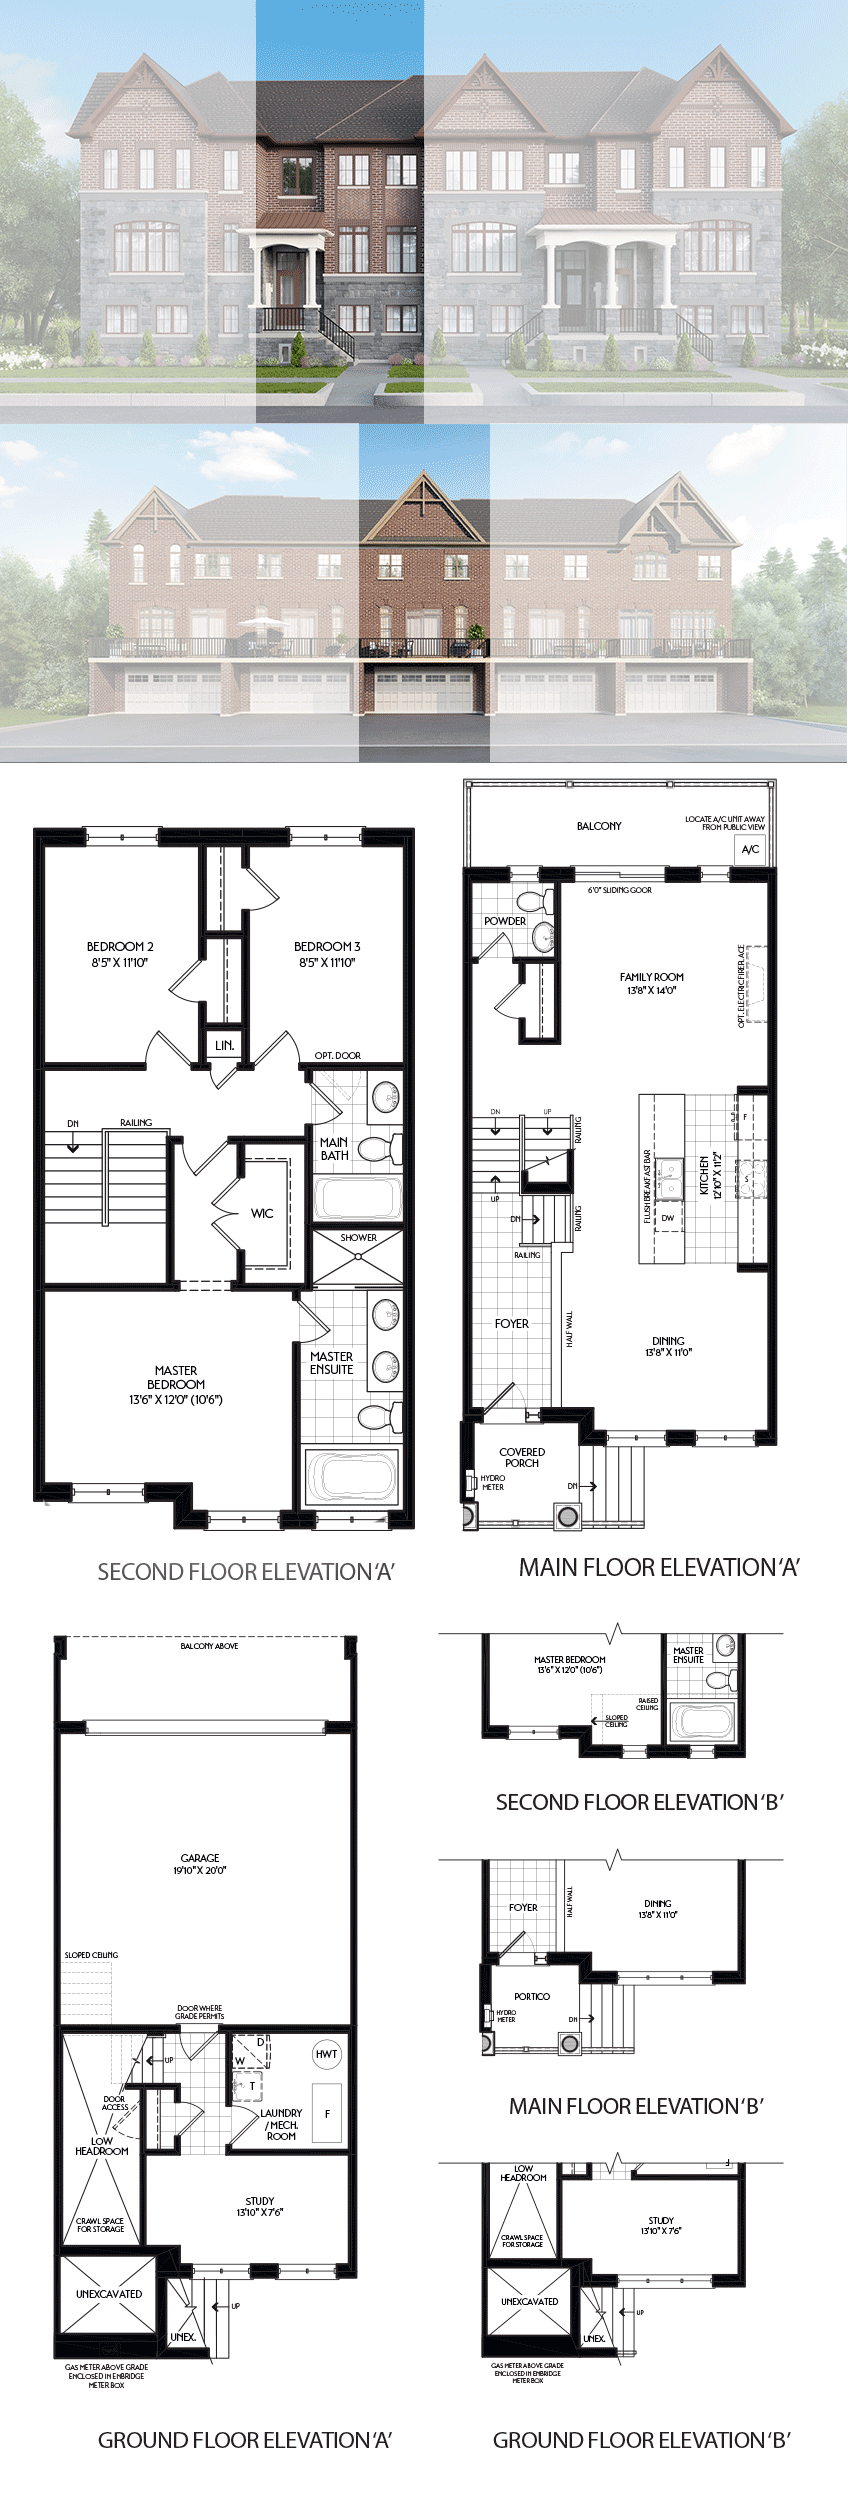 http://www.rodeofinehomes.com/wp-content/uploads/2015/06/LaFontaine_A1.png